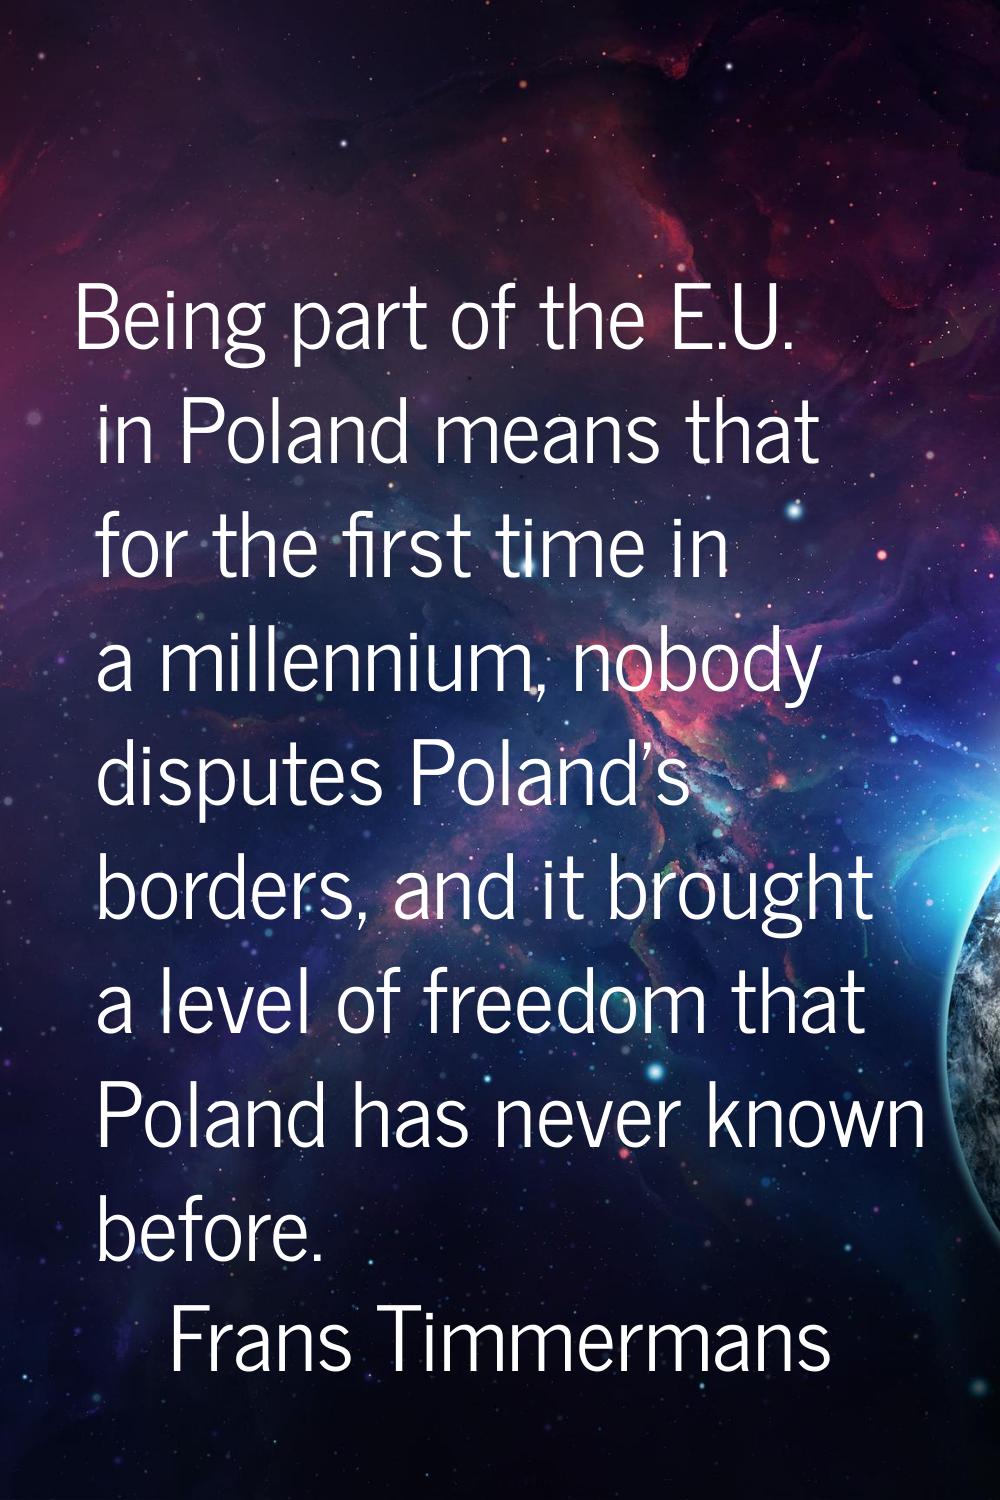 Being part of the E.U. in Poland means that for the first time in a millennium, nobody disputes Pol